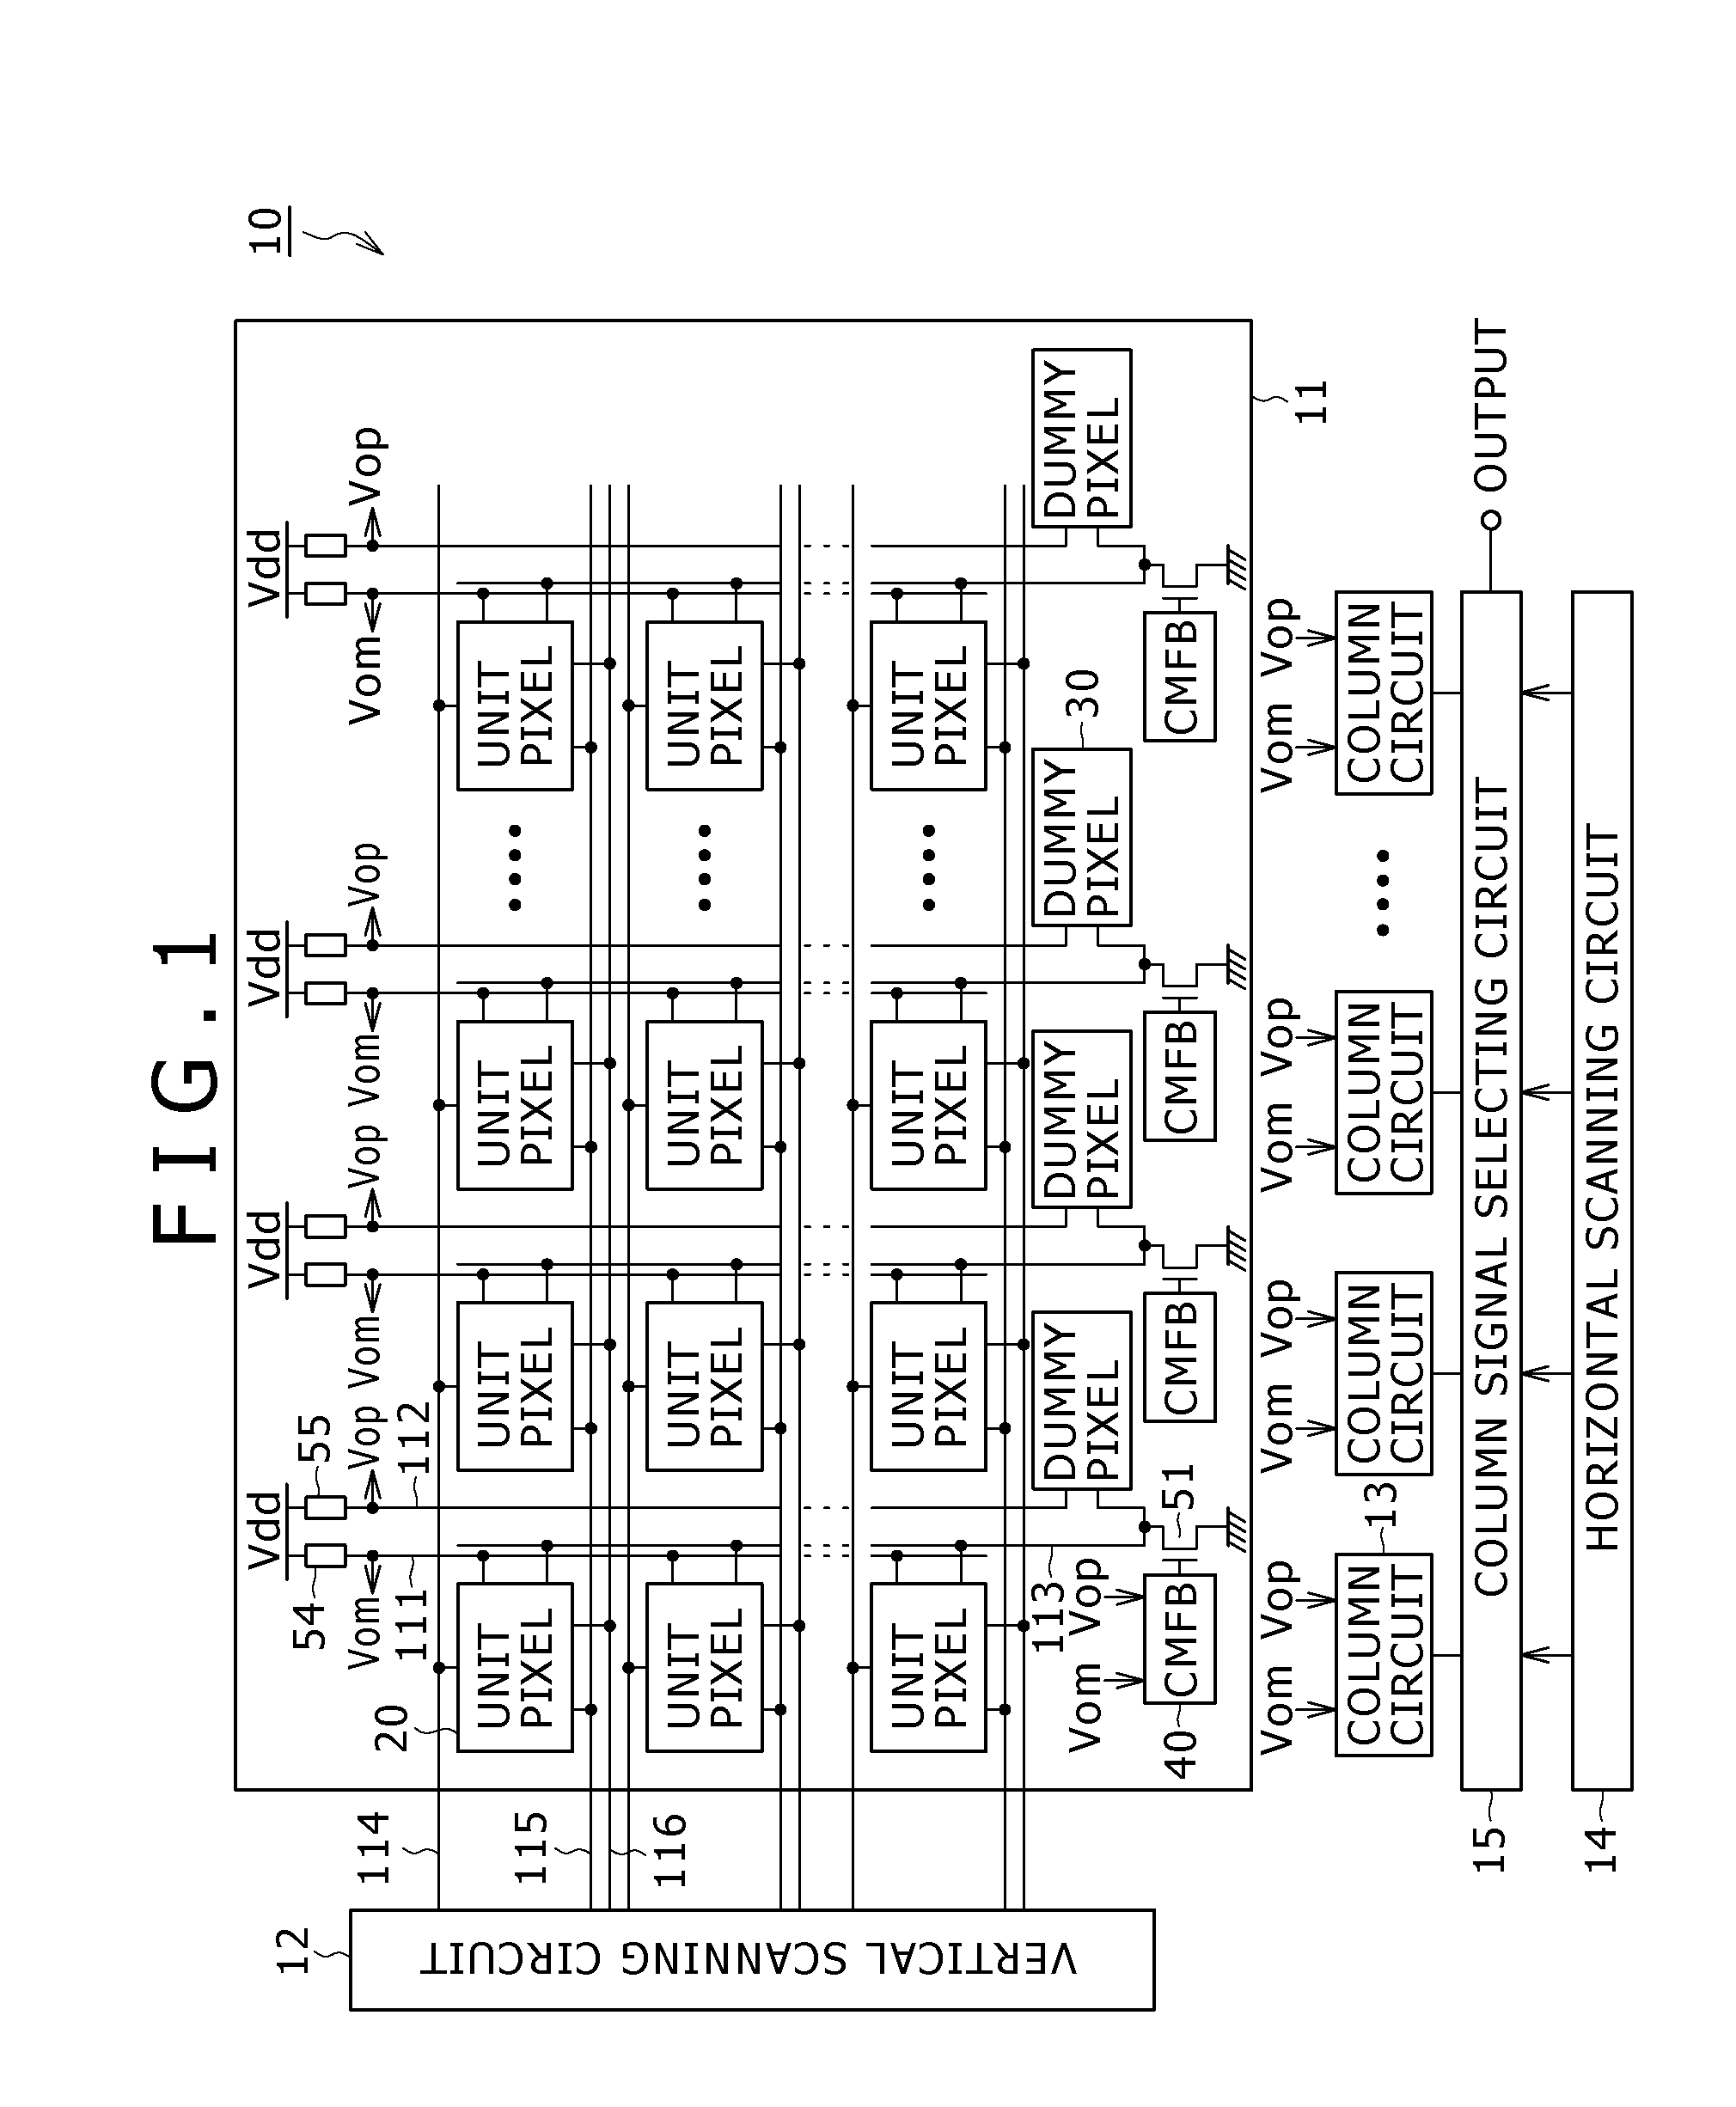 Solid-state image pickup device, a method of driving the same, a signal processing method for the same, and image pickup apparatus